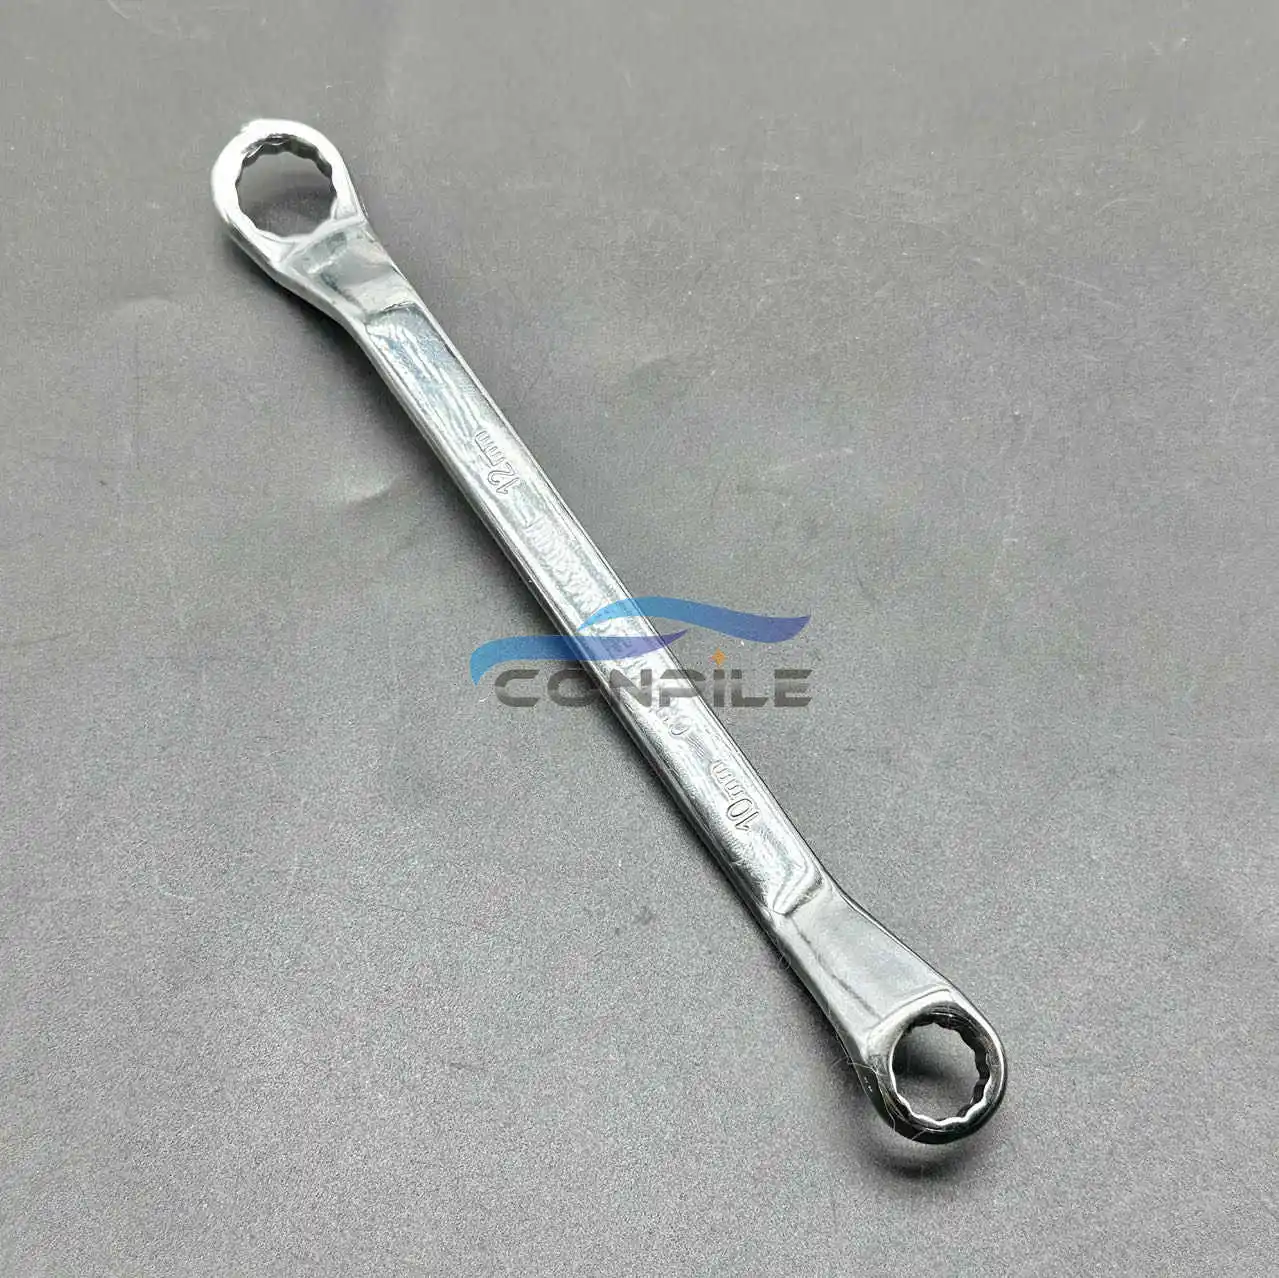 

For Volkswagen Audi EA888 water pump drive belt pulley special wrench T10360 12mm